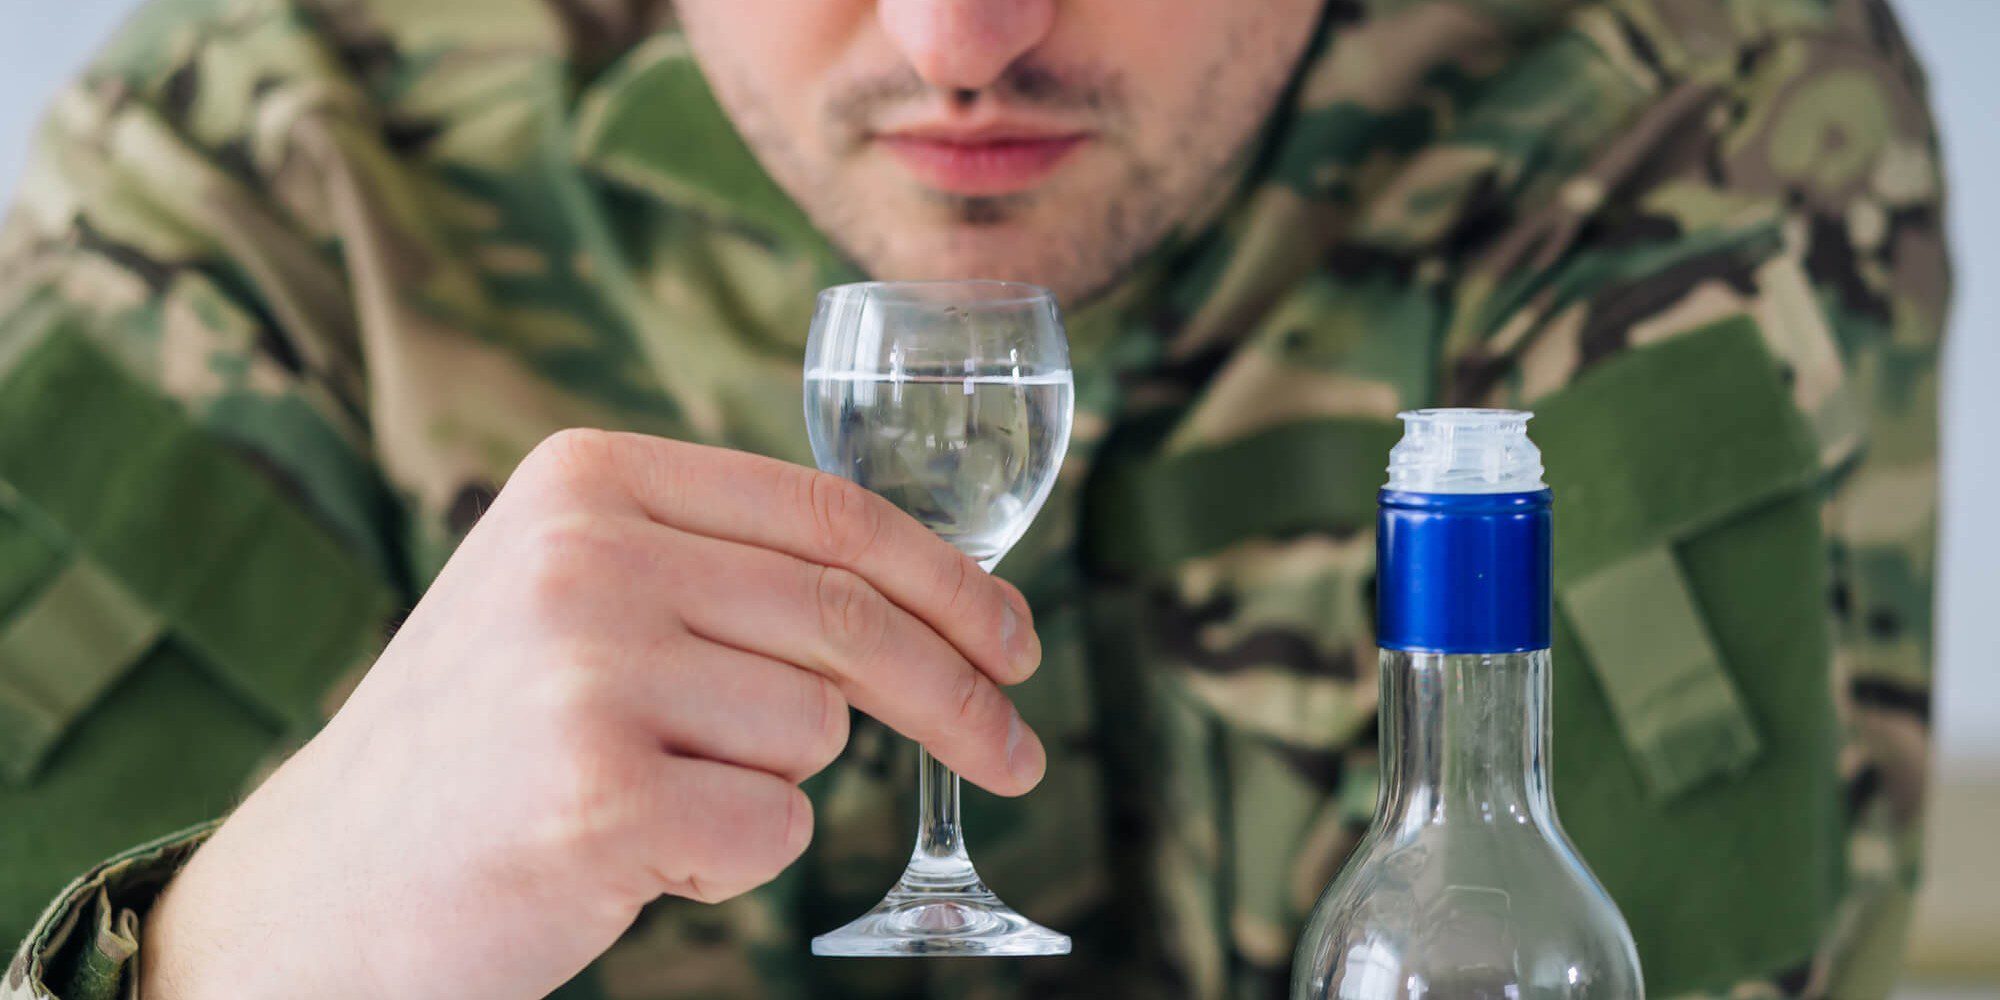 What Effect Does Alcohol Have on PTSD Symptoms?